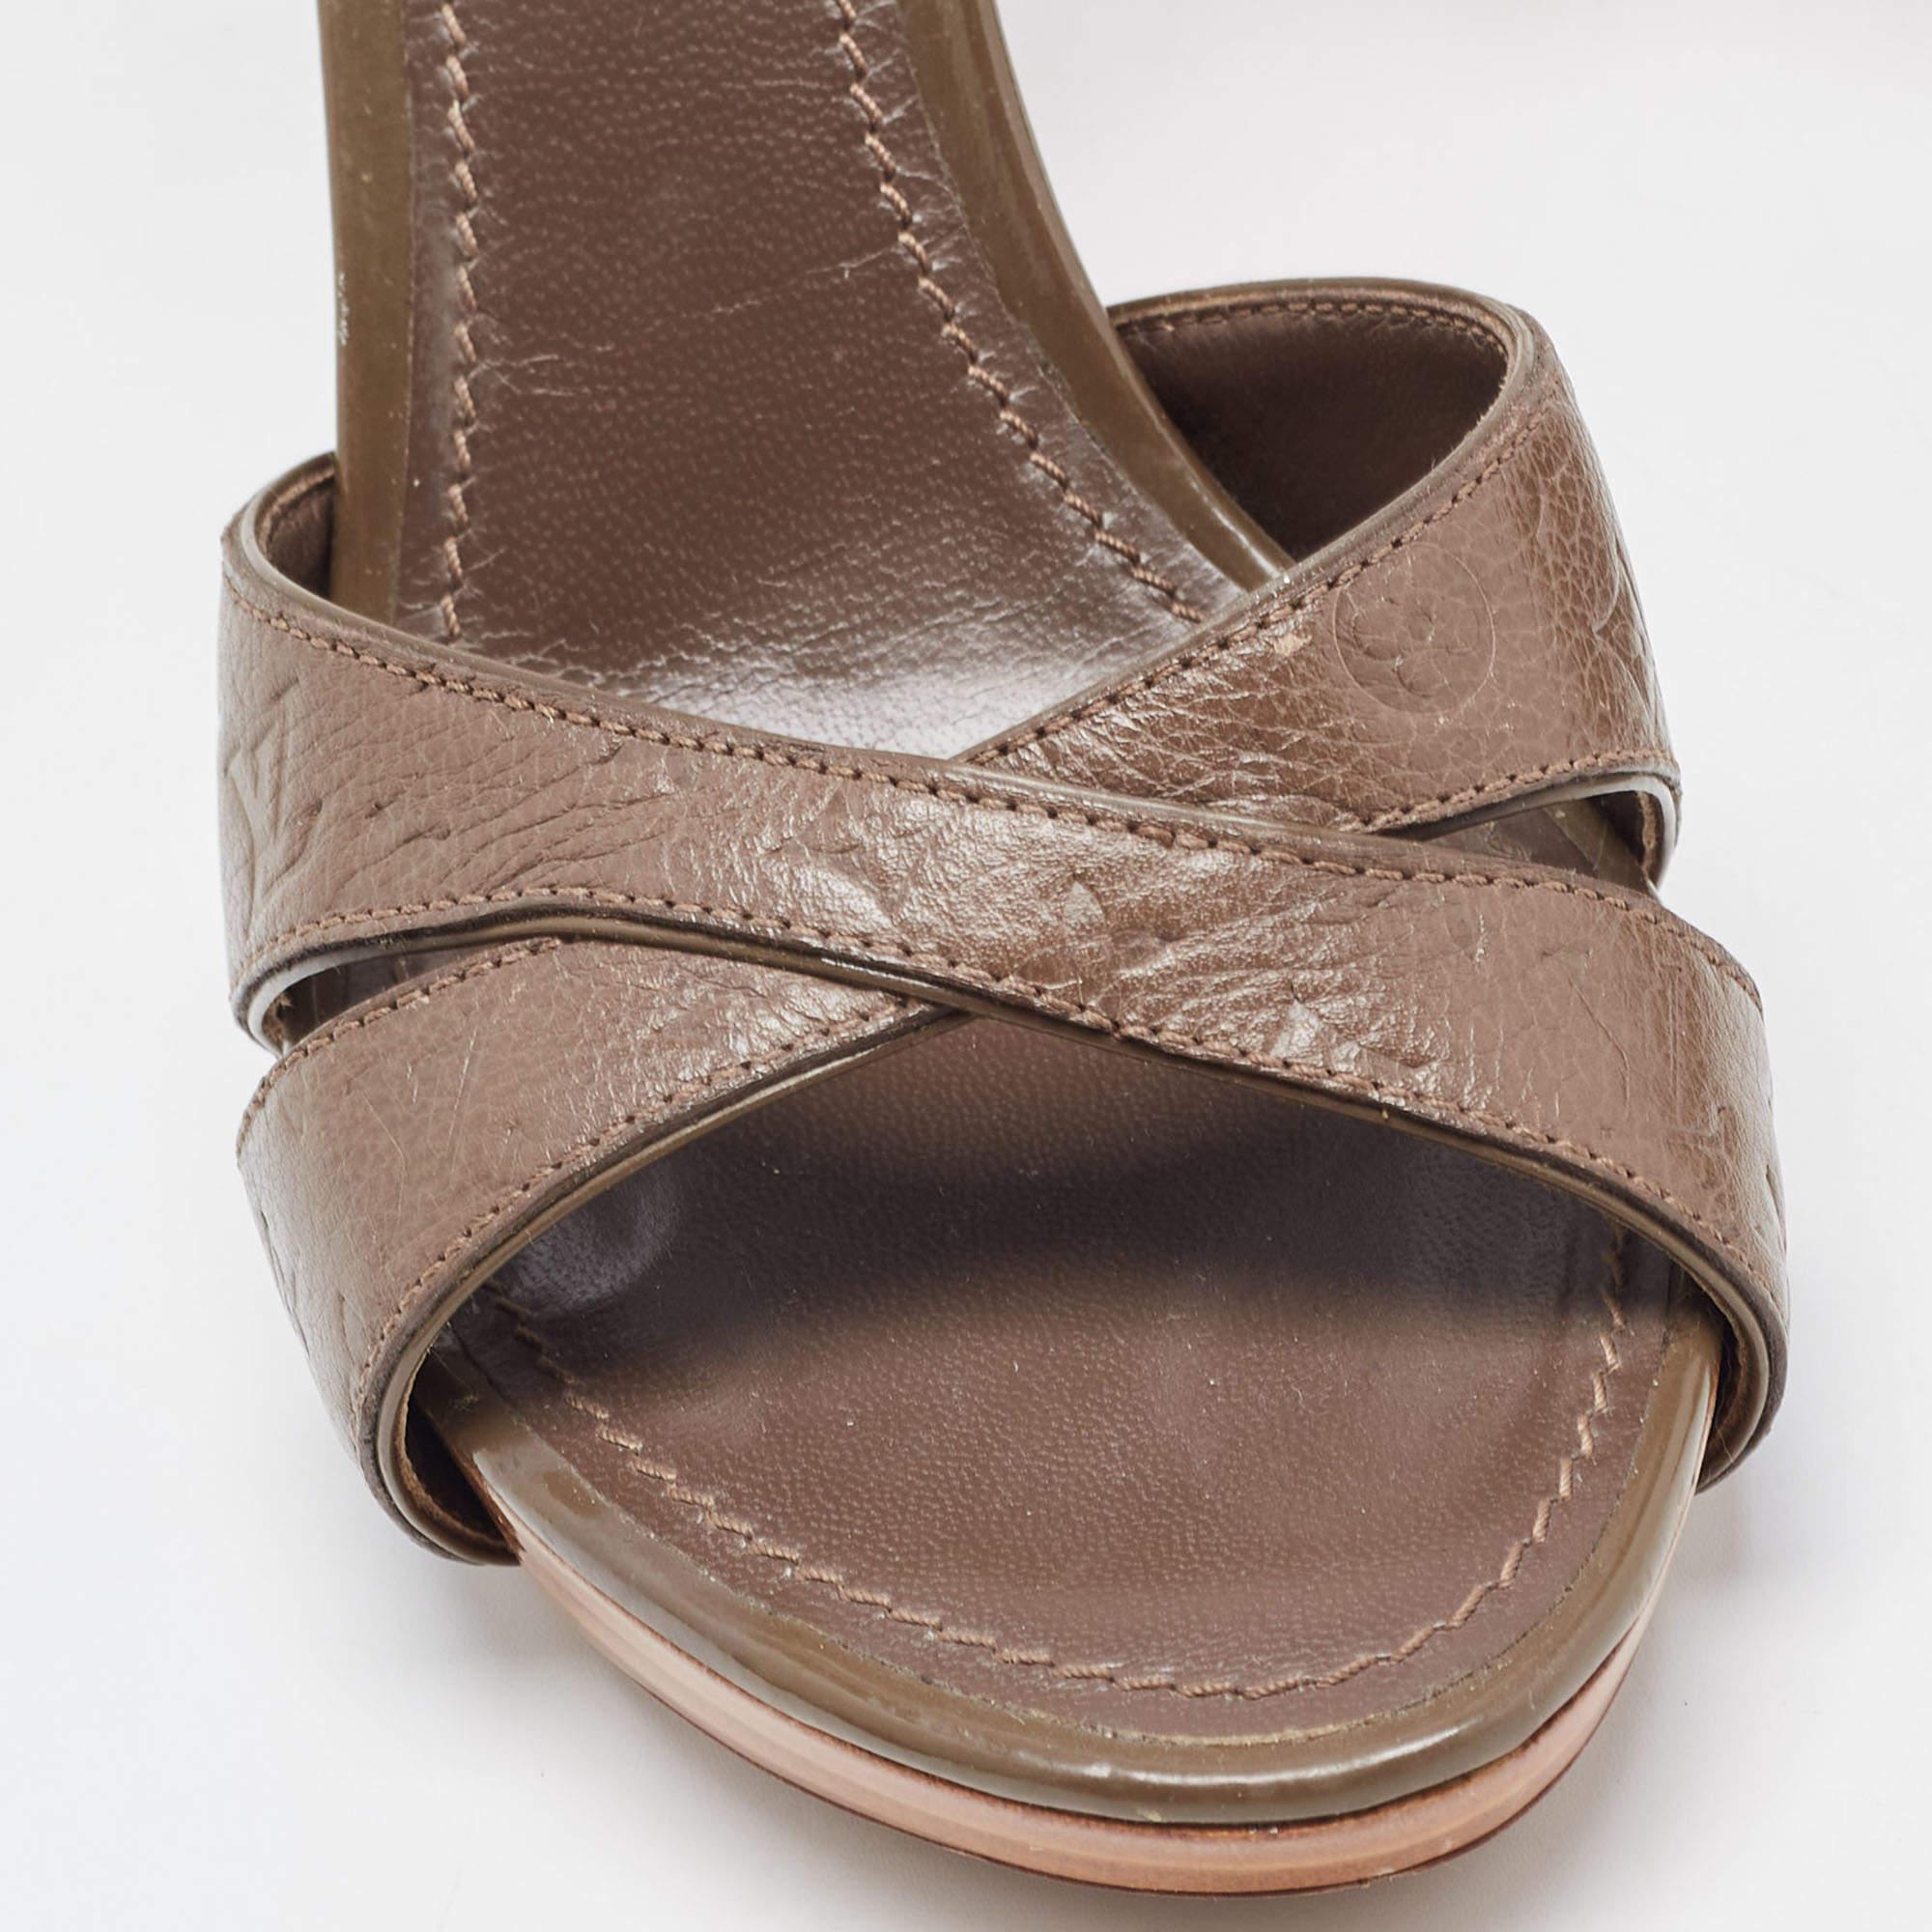 Louis Vuitton Brown Leather Ankle Strap Sandals Size 38 4